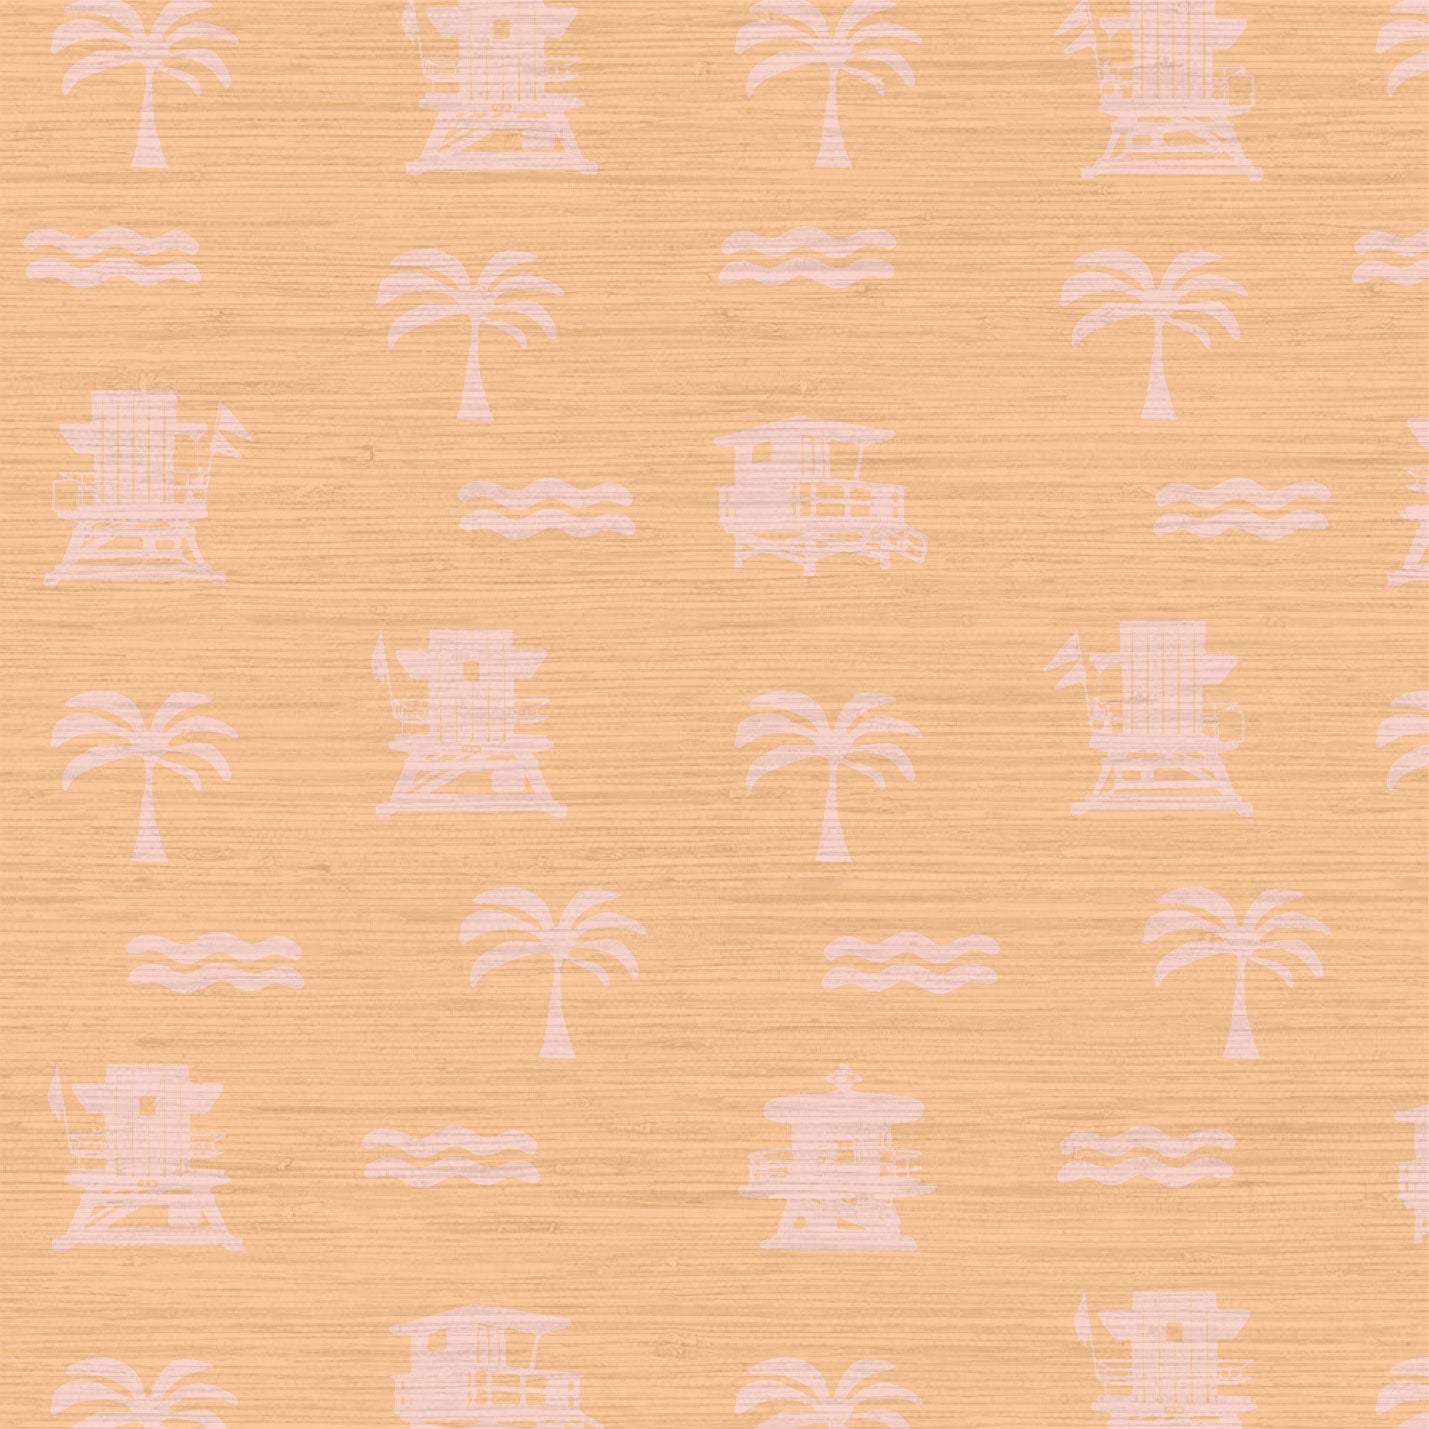 light orange/tangerine base grasscloth wallpaper with light pink print of lifeguard stands, waves and palm trees in a mini icon print